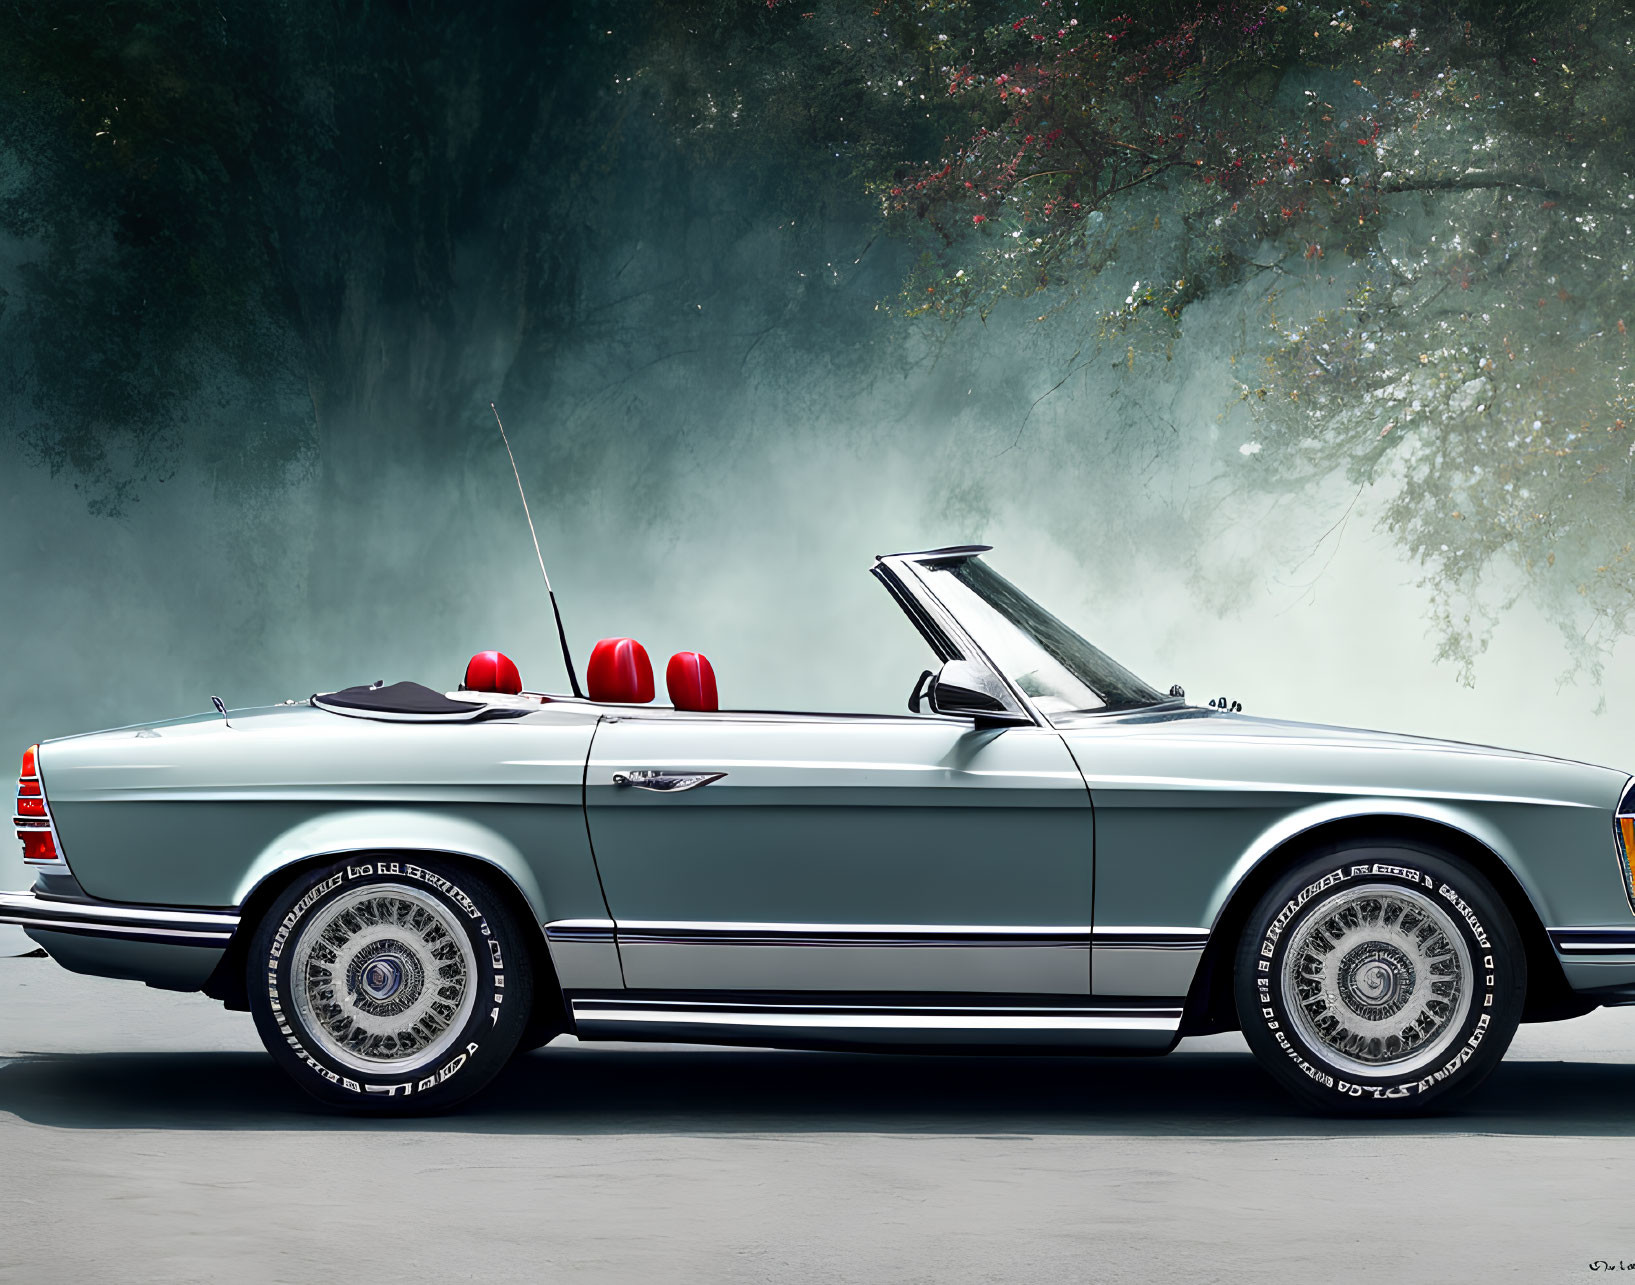 Vintage Convertible Car with Chrome Details and White-Wall Tires Parked Against Misty Trees